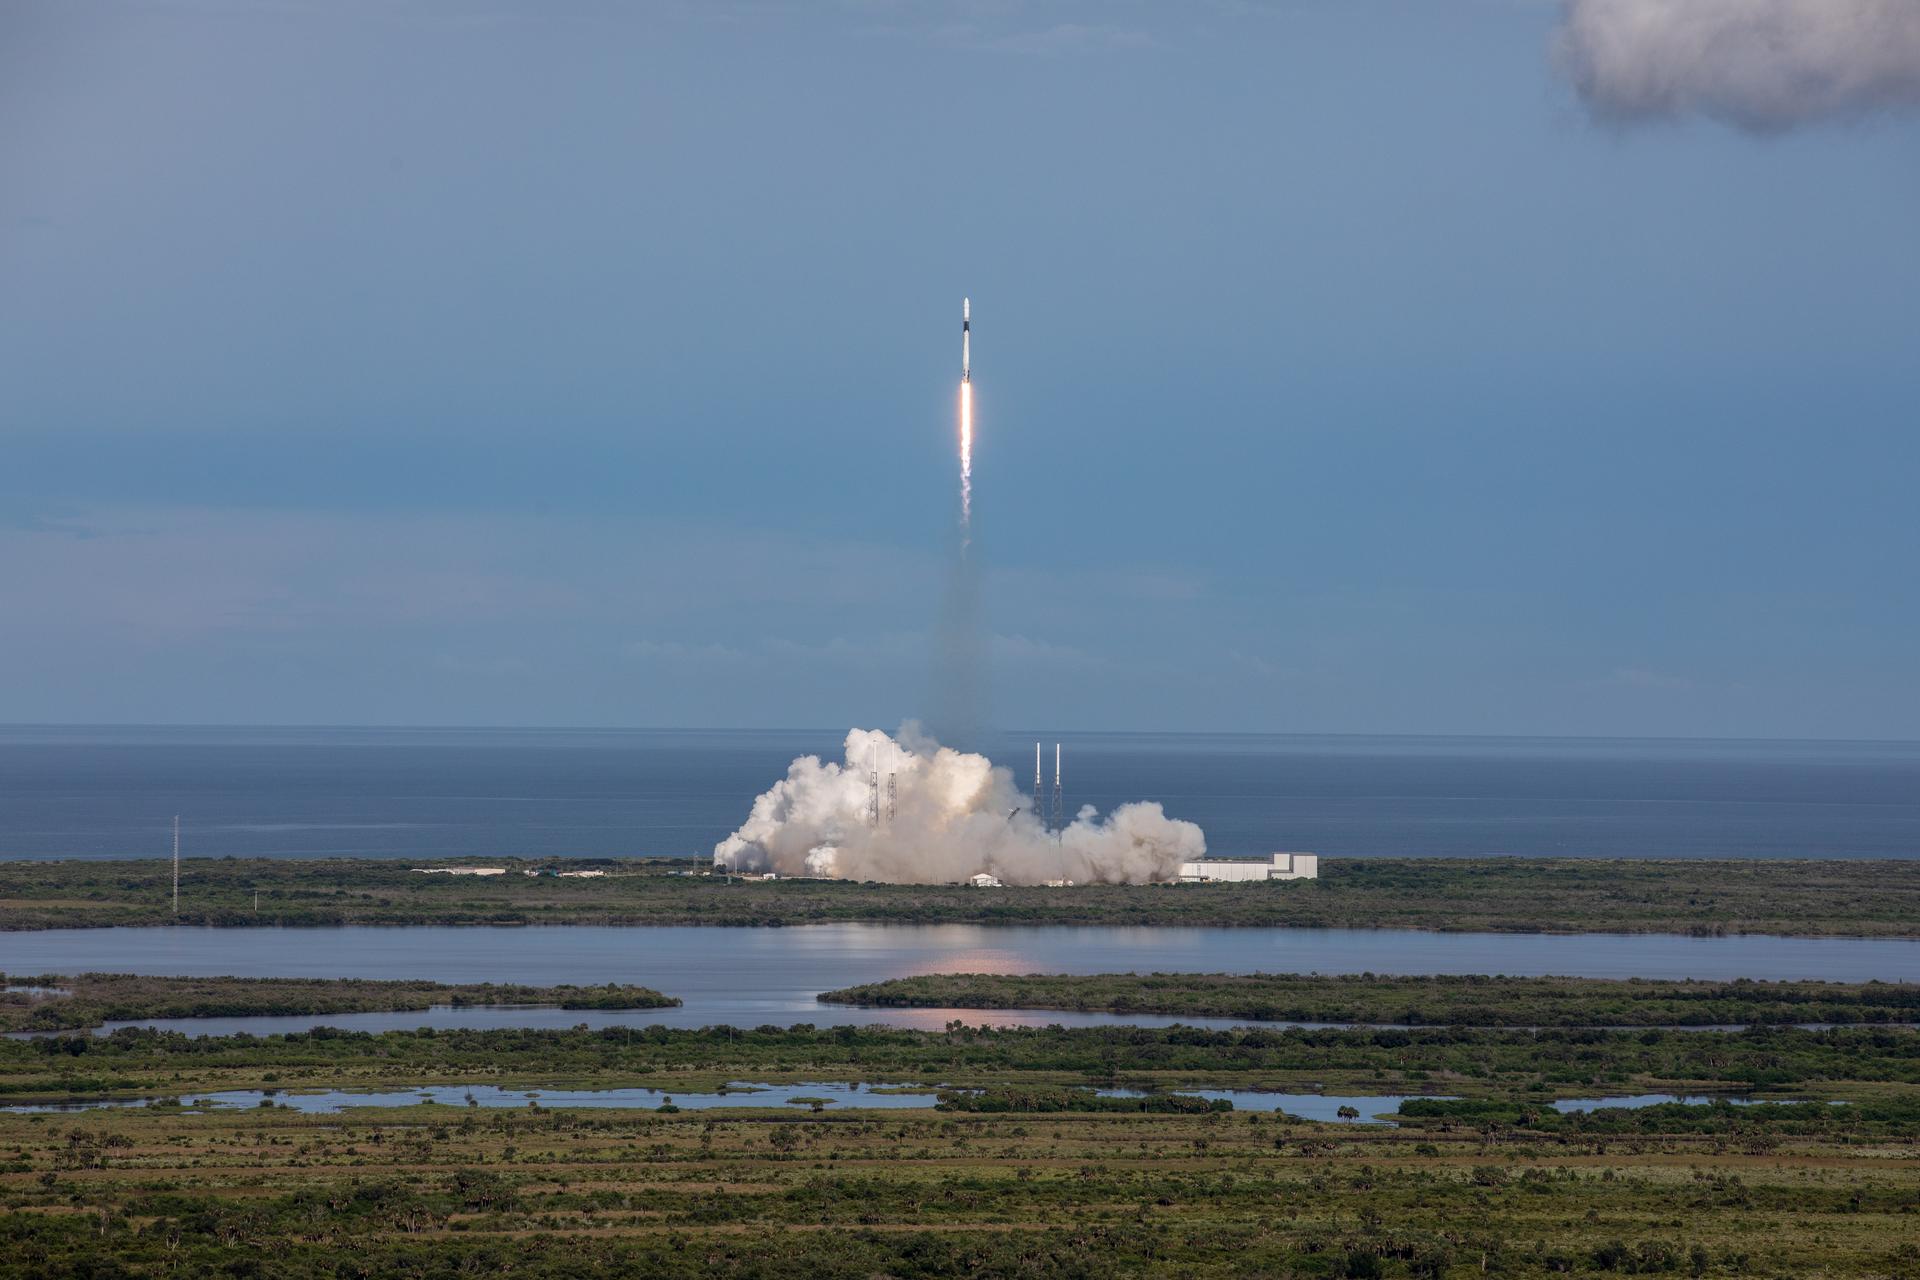 The launch of SpaceX's 18th Commercial Resupply Services mission to the International Space Station on July 25, 2019.